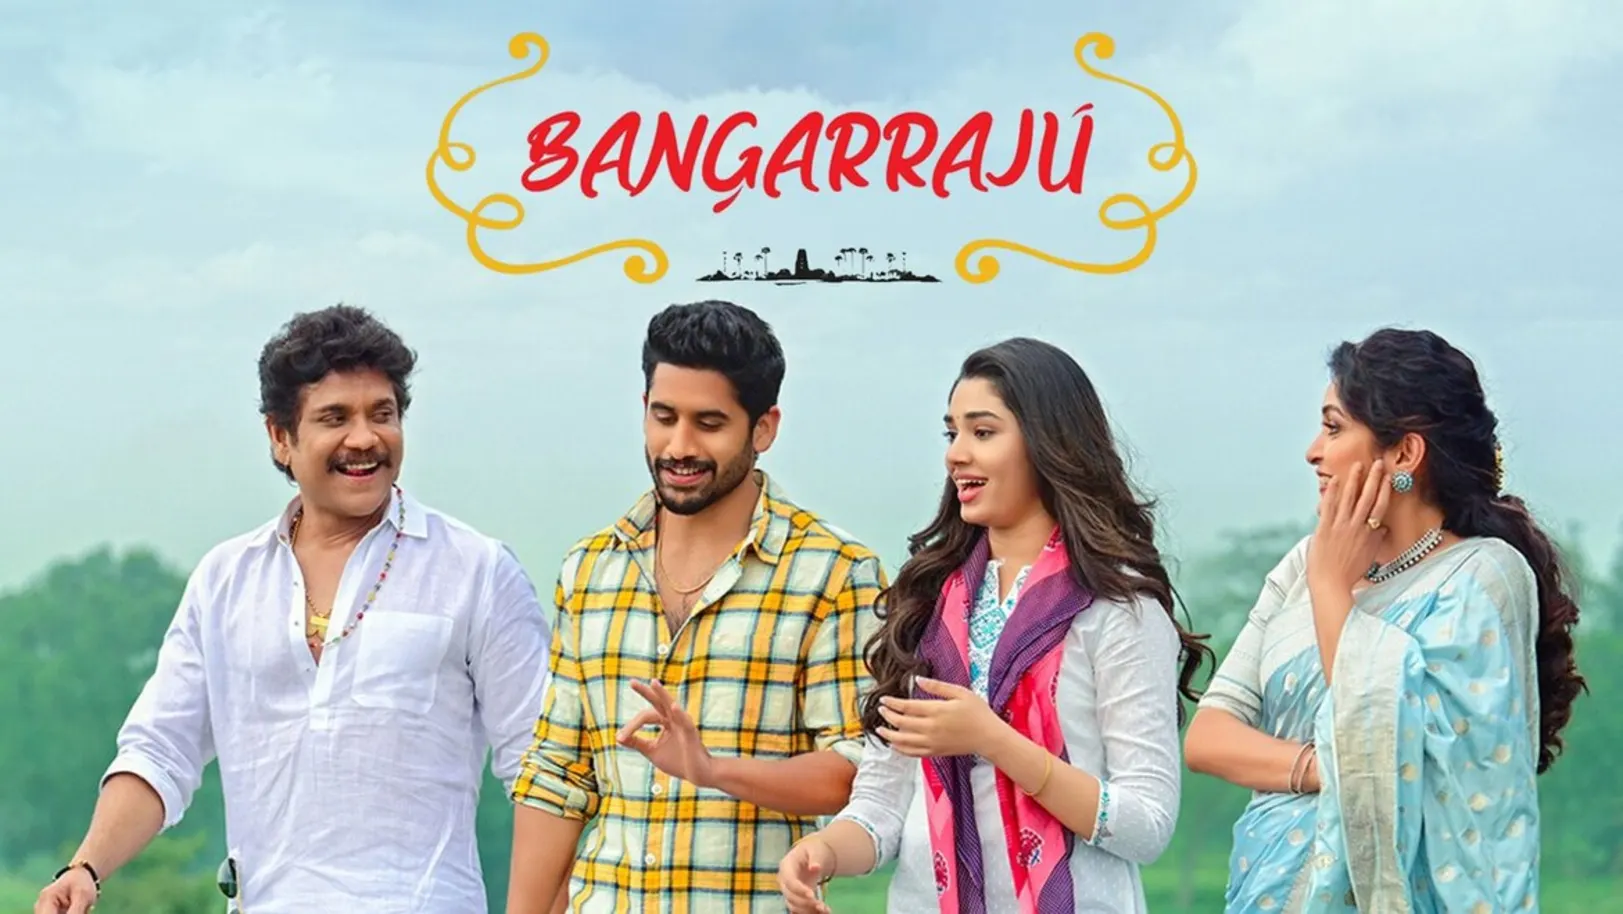 Bangarraju Streaming Now On &Pictures